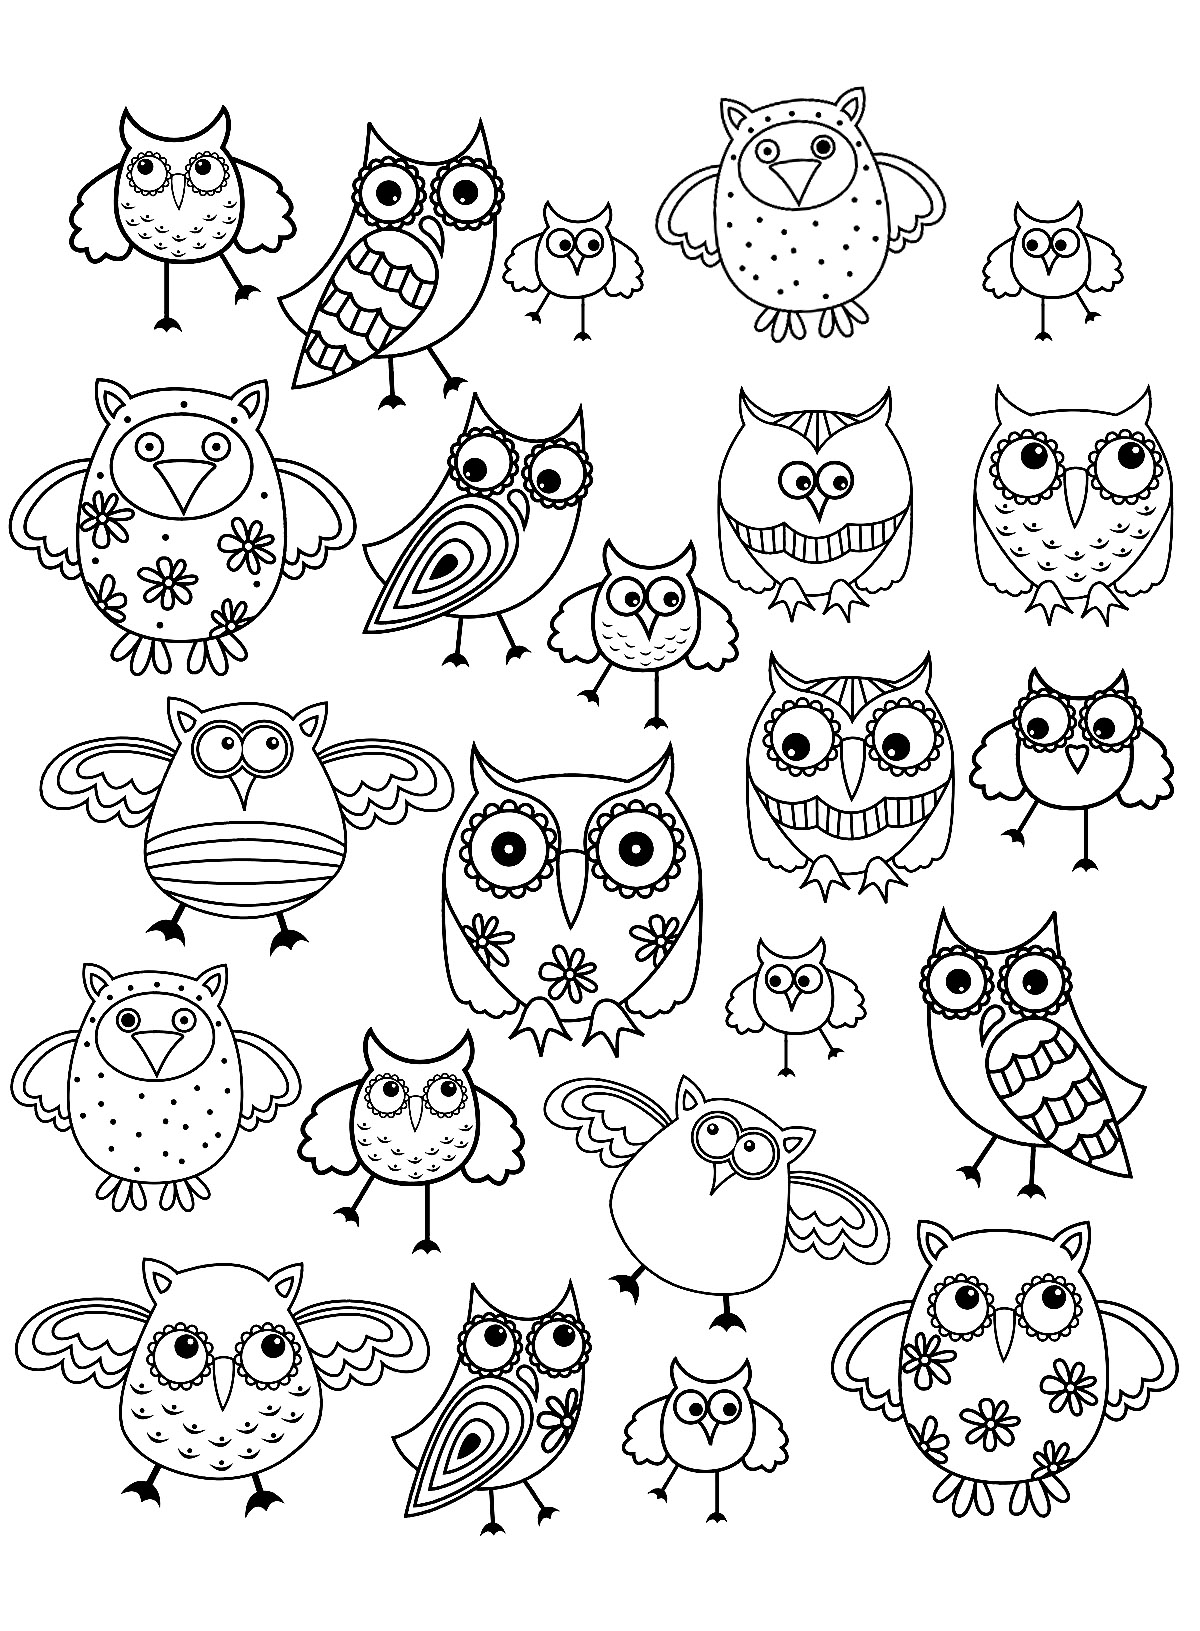 Owls composing a simple Doodle drawing, to print and color